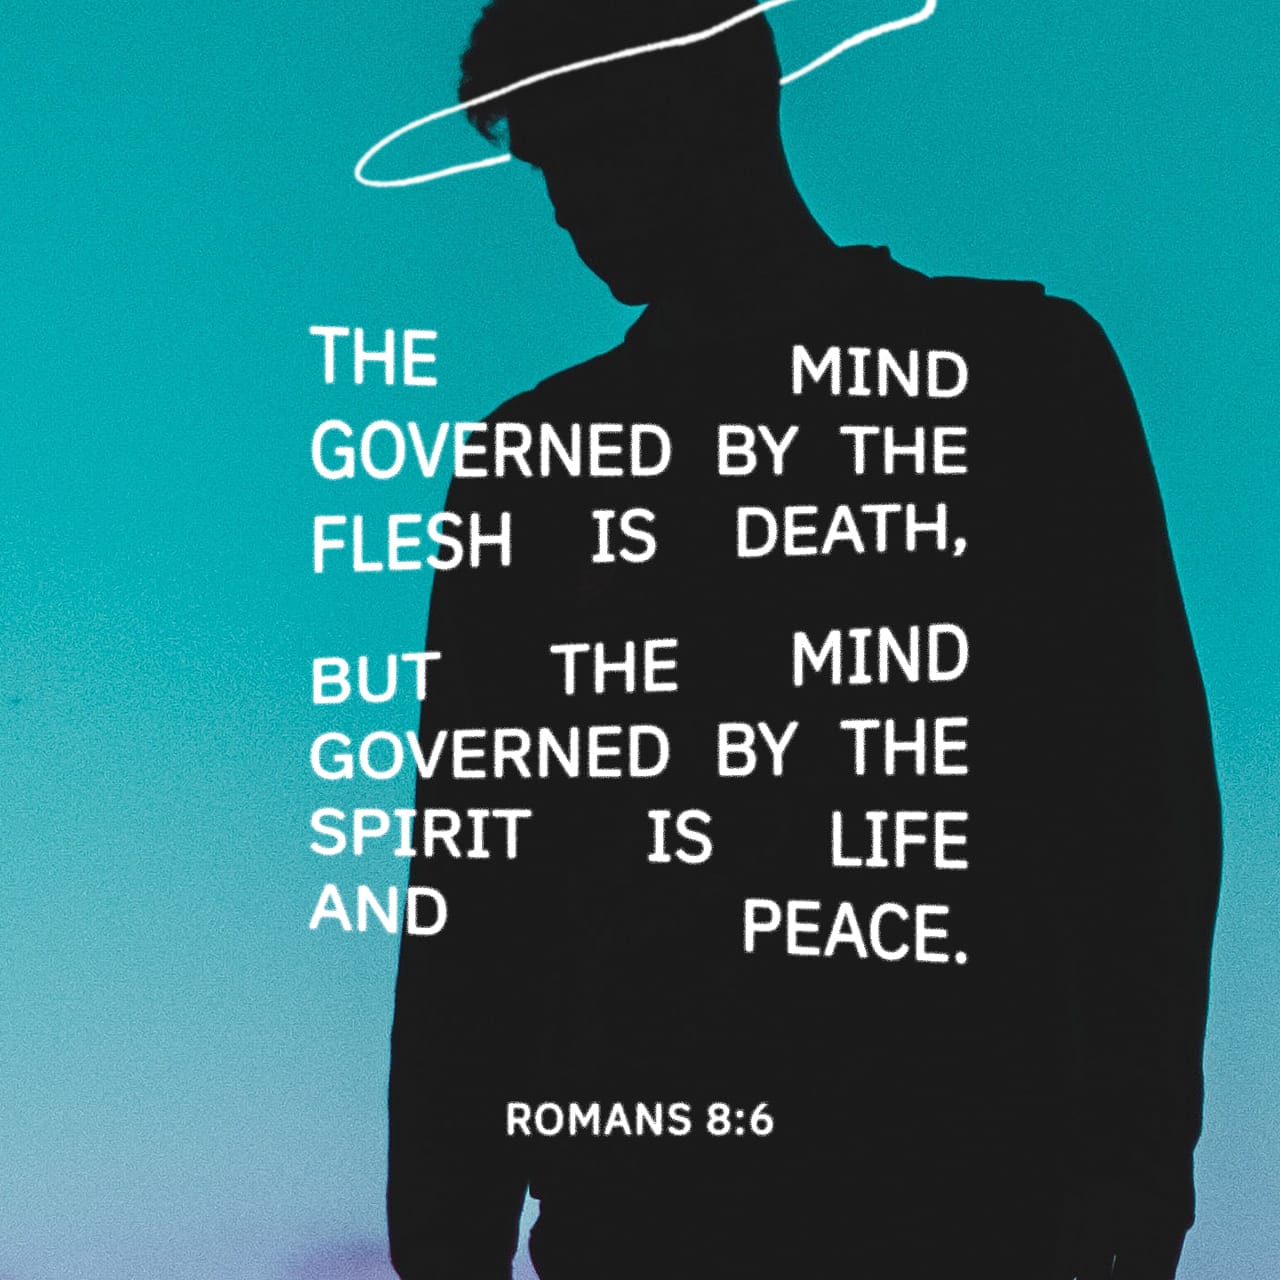 Romans 8:6 The mind governed by the flesh is death, but the mind governed by the Spirit is life and peace. | New International Version (NIV) | Download The Bible App Now